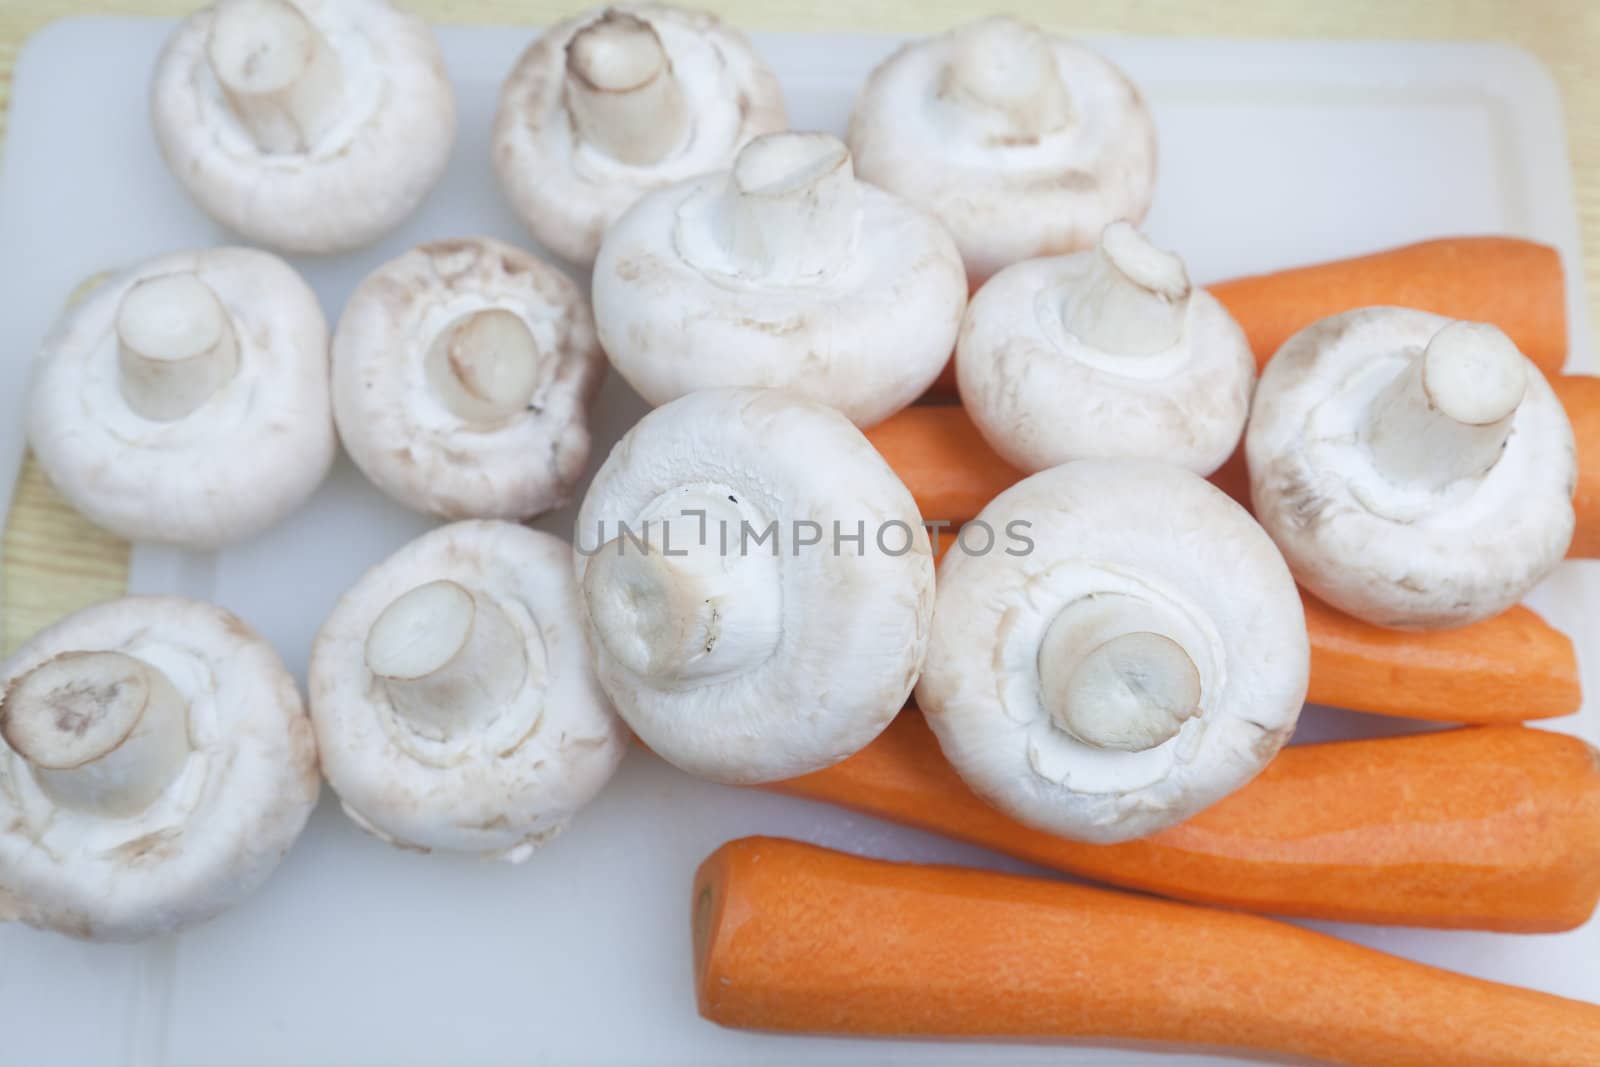 Carrots and mushrooms by Portokalis